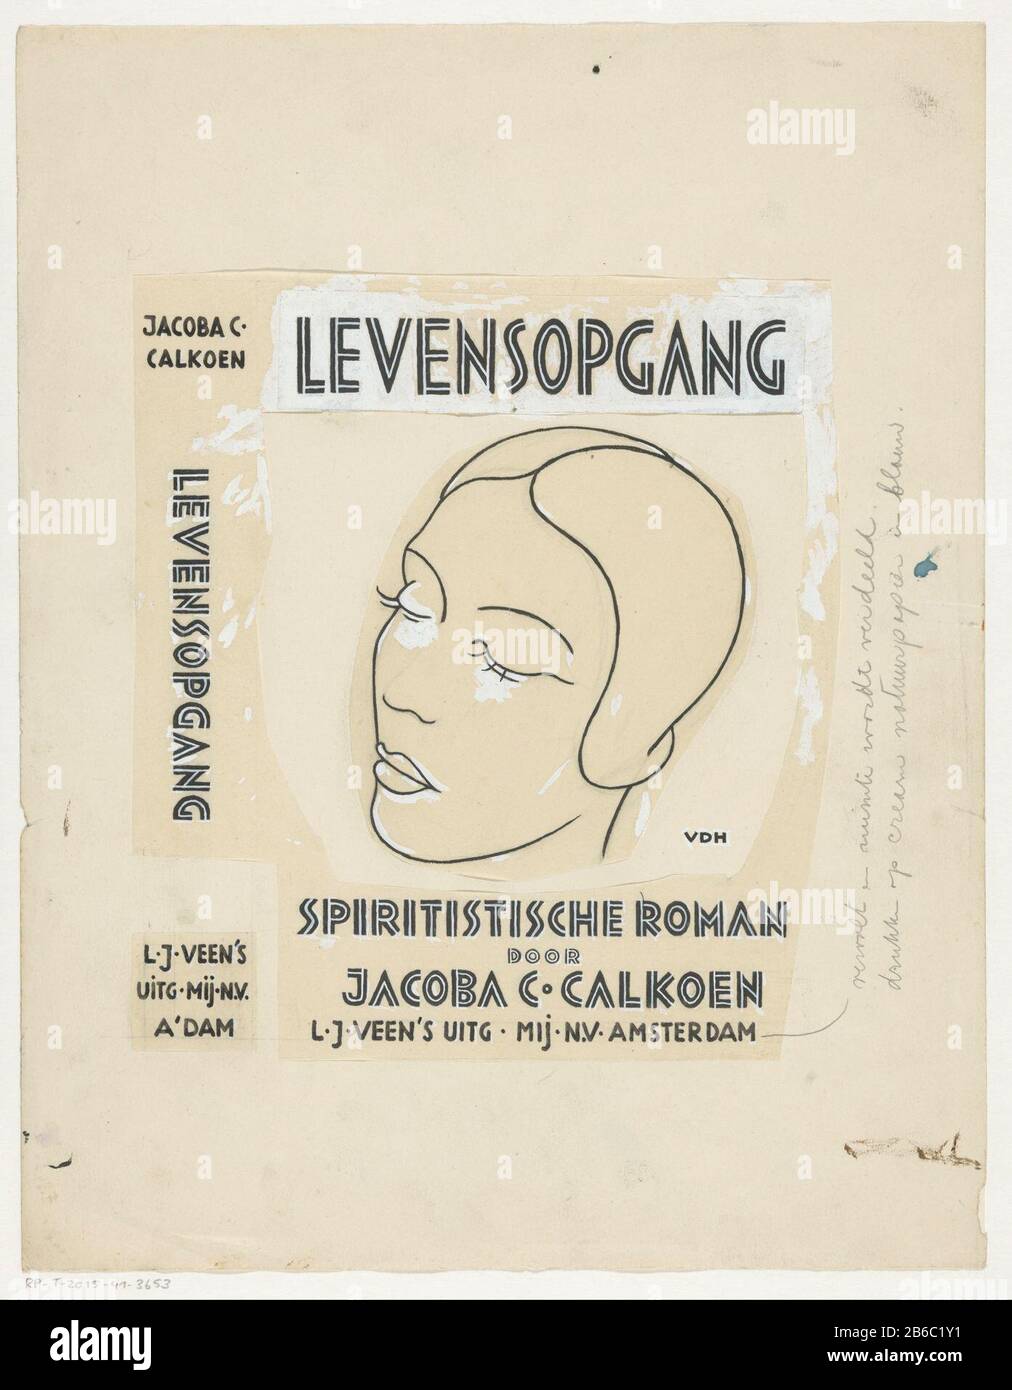 Tire Design for Jacoba C Calkoen, Life Opgang Spiritistic novel, 1933 Head of a woman with short hair and closed ogen. Manufacturer : artist: unknown (personally signed) Date: characteristics or 1933 Physical: brush in black with white body color over pencil; paper pasted on paper material: paper paint finishing paint pencil Technique: brush / paste Dimensions: H 340 mm × W 264 mm Subject: head (human) - AA - female human figure and right eyes closed Stock Photo